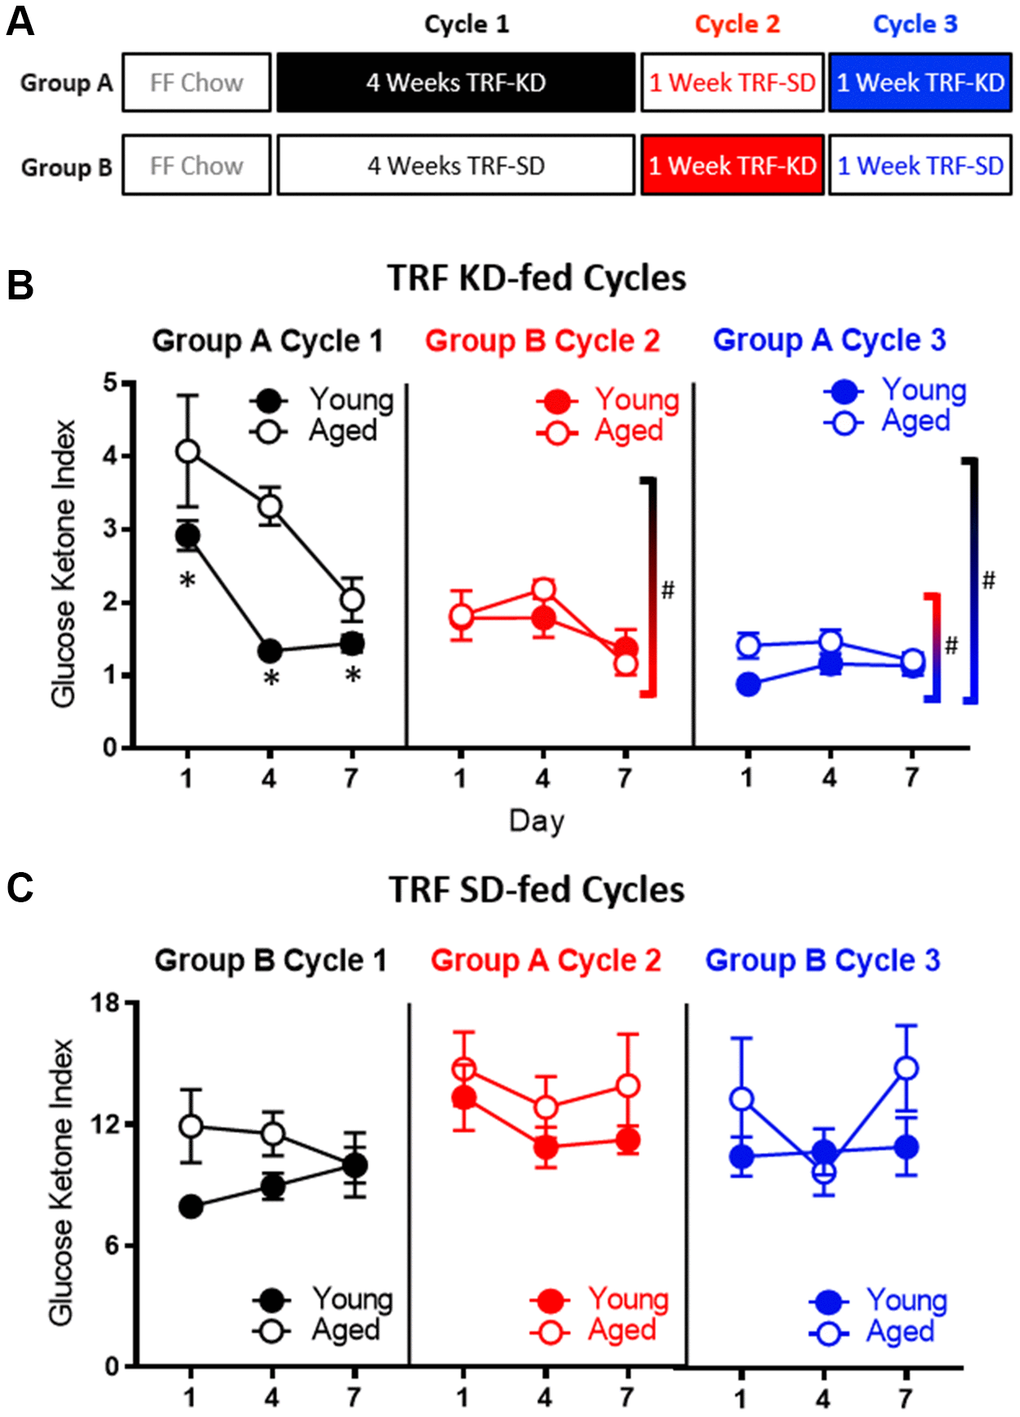 Age-related impairments in keto-adaptation are ameliorated with TRF and a previous keto-adaptation cycle. (A) Timeline of dietary interventions used for groups (A, B). Solid blocks indicate TRF-KD, empty blocks indicate TRF-SD. (B) GKI during 1 week of keto-adaptation is significantly lower in TRF-KD-fed rats that transitioned from TRF (red) relative to ad libitum-fed animals (black). However, rats that transitioned from TRF-SD to TRF-KD with a previous cycle of TRF-KD (blue) showed the lowest GKI. (C) Consumption of the TRF-SD was associated with high baseline GKI levels immediately after the cessation of carbohydrate restriction. Data are represented as group mean ± 1 SEM, * indicates p 